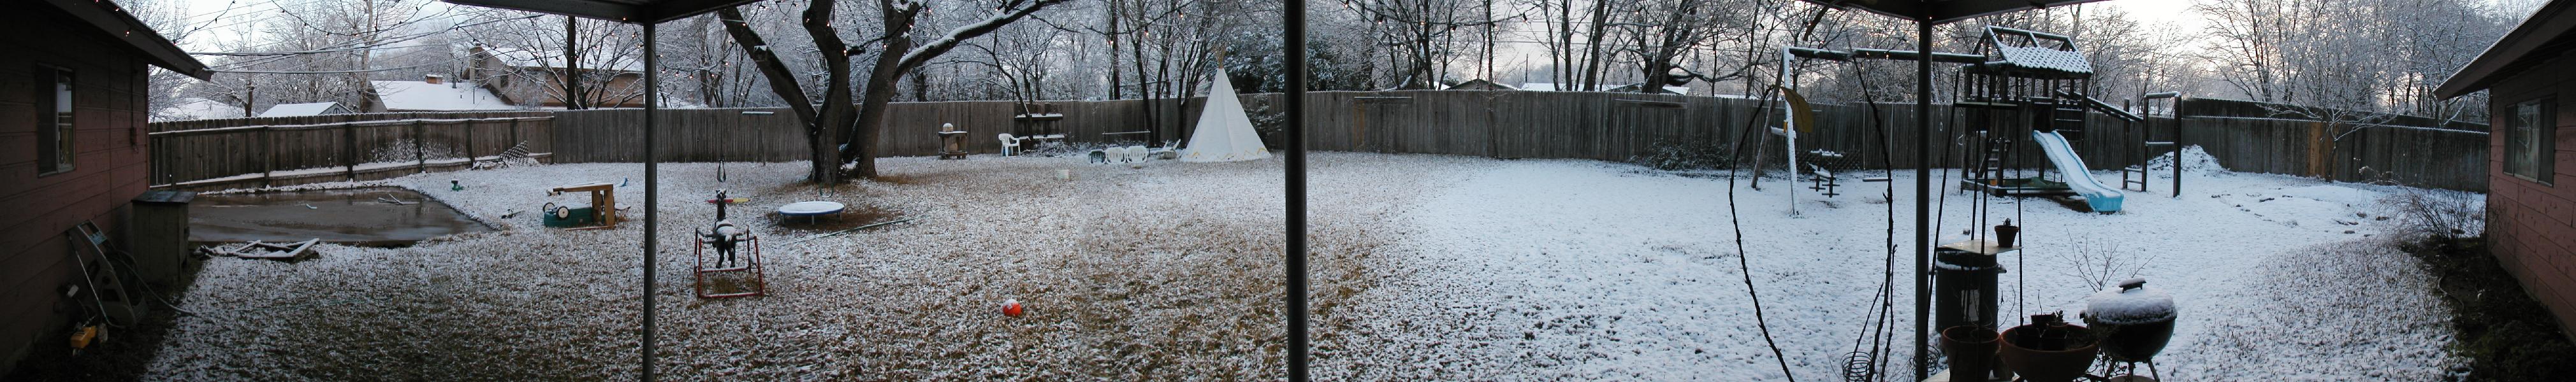 Snow panorama - most snow in Austin in 19 years!